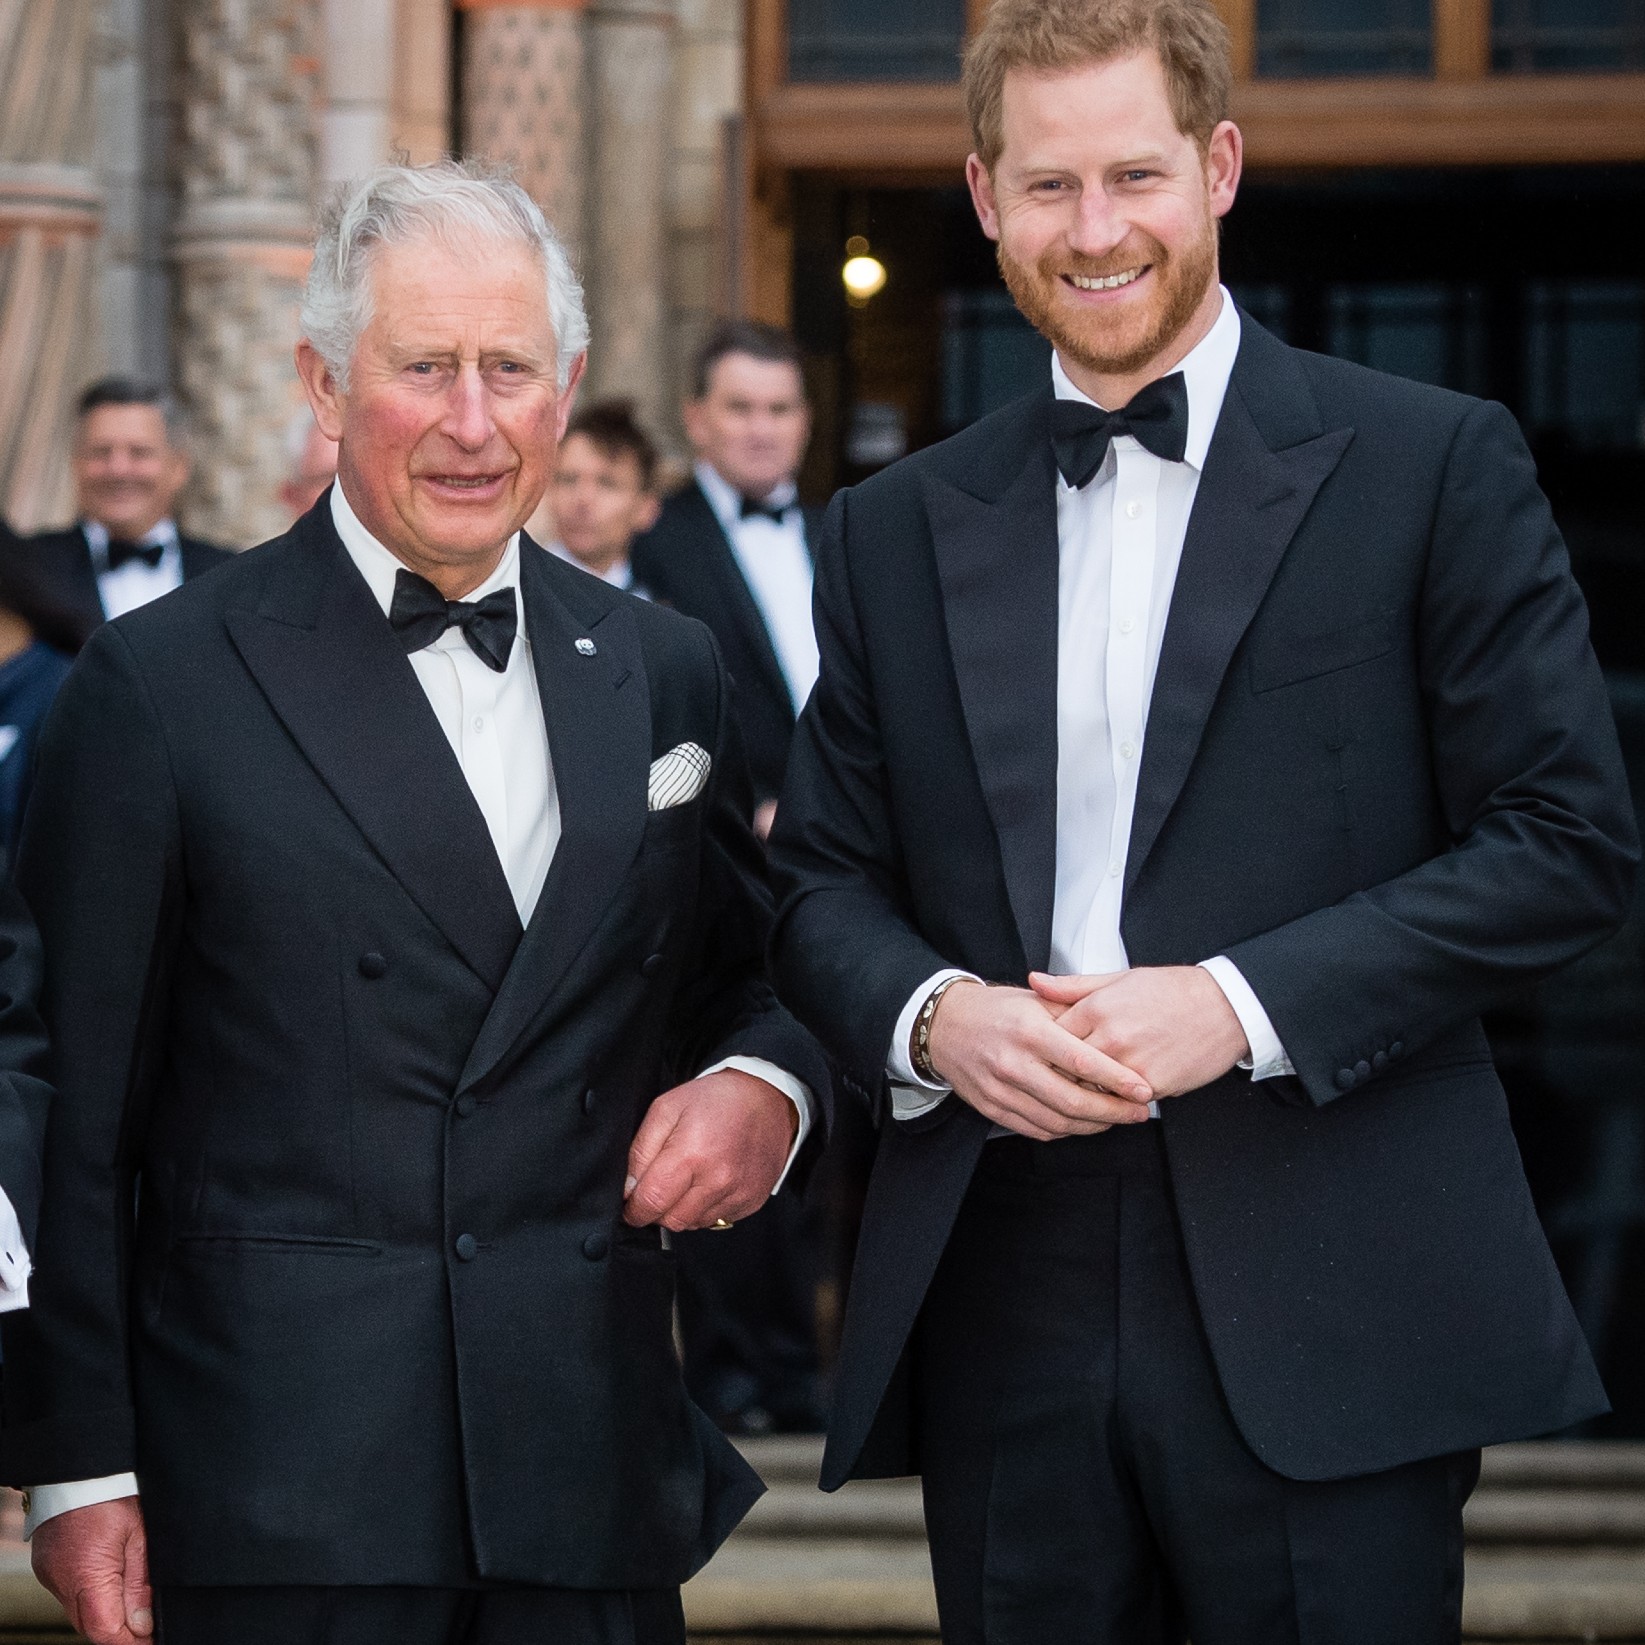  Prince Harry on claims a Palace office 'leaked' key Sussex news 